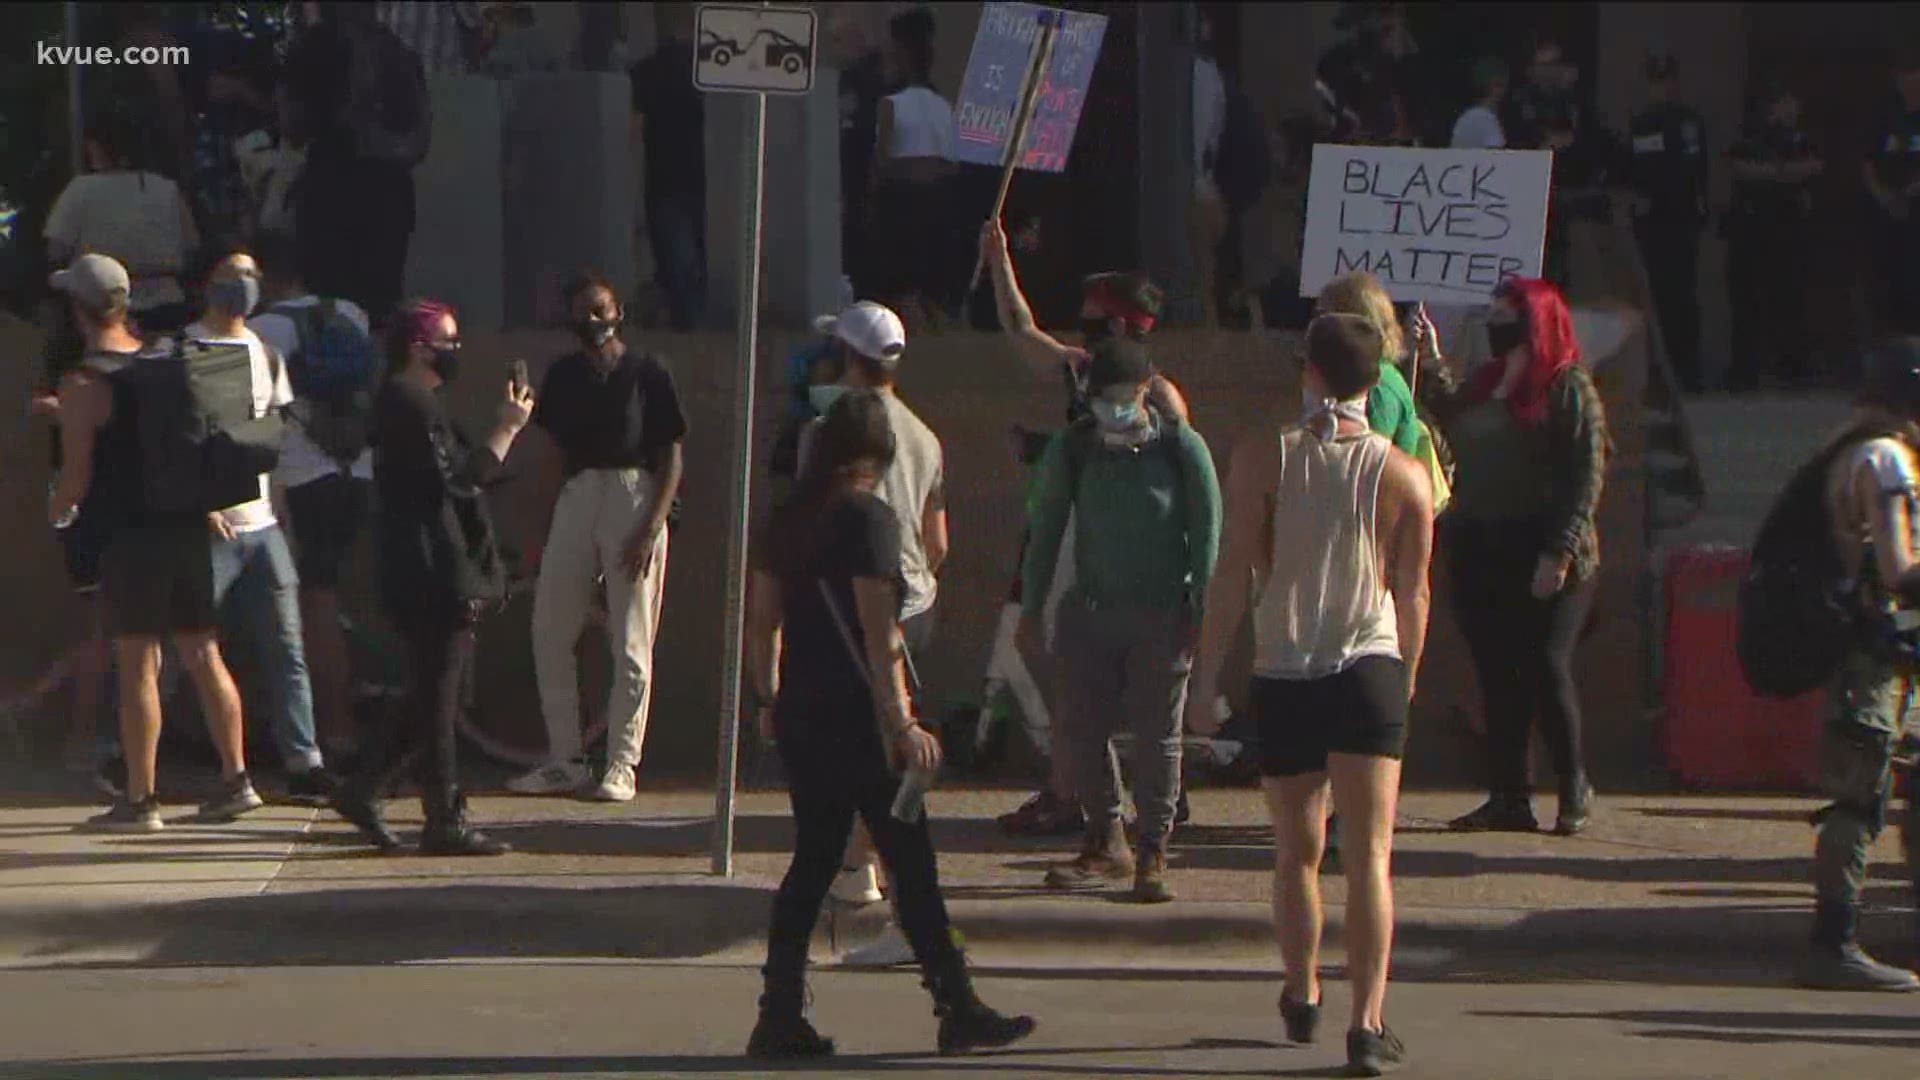 Thursday marks the seventh night of protests in Austin.